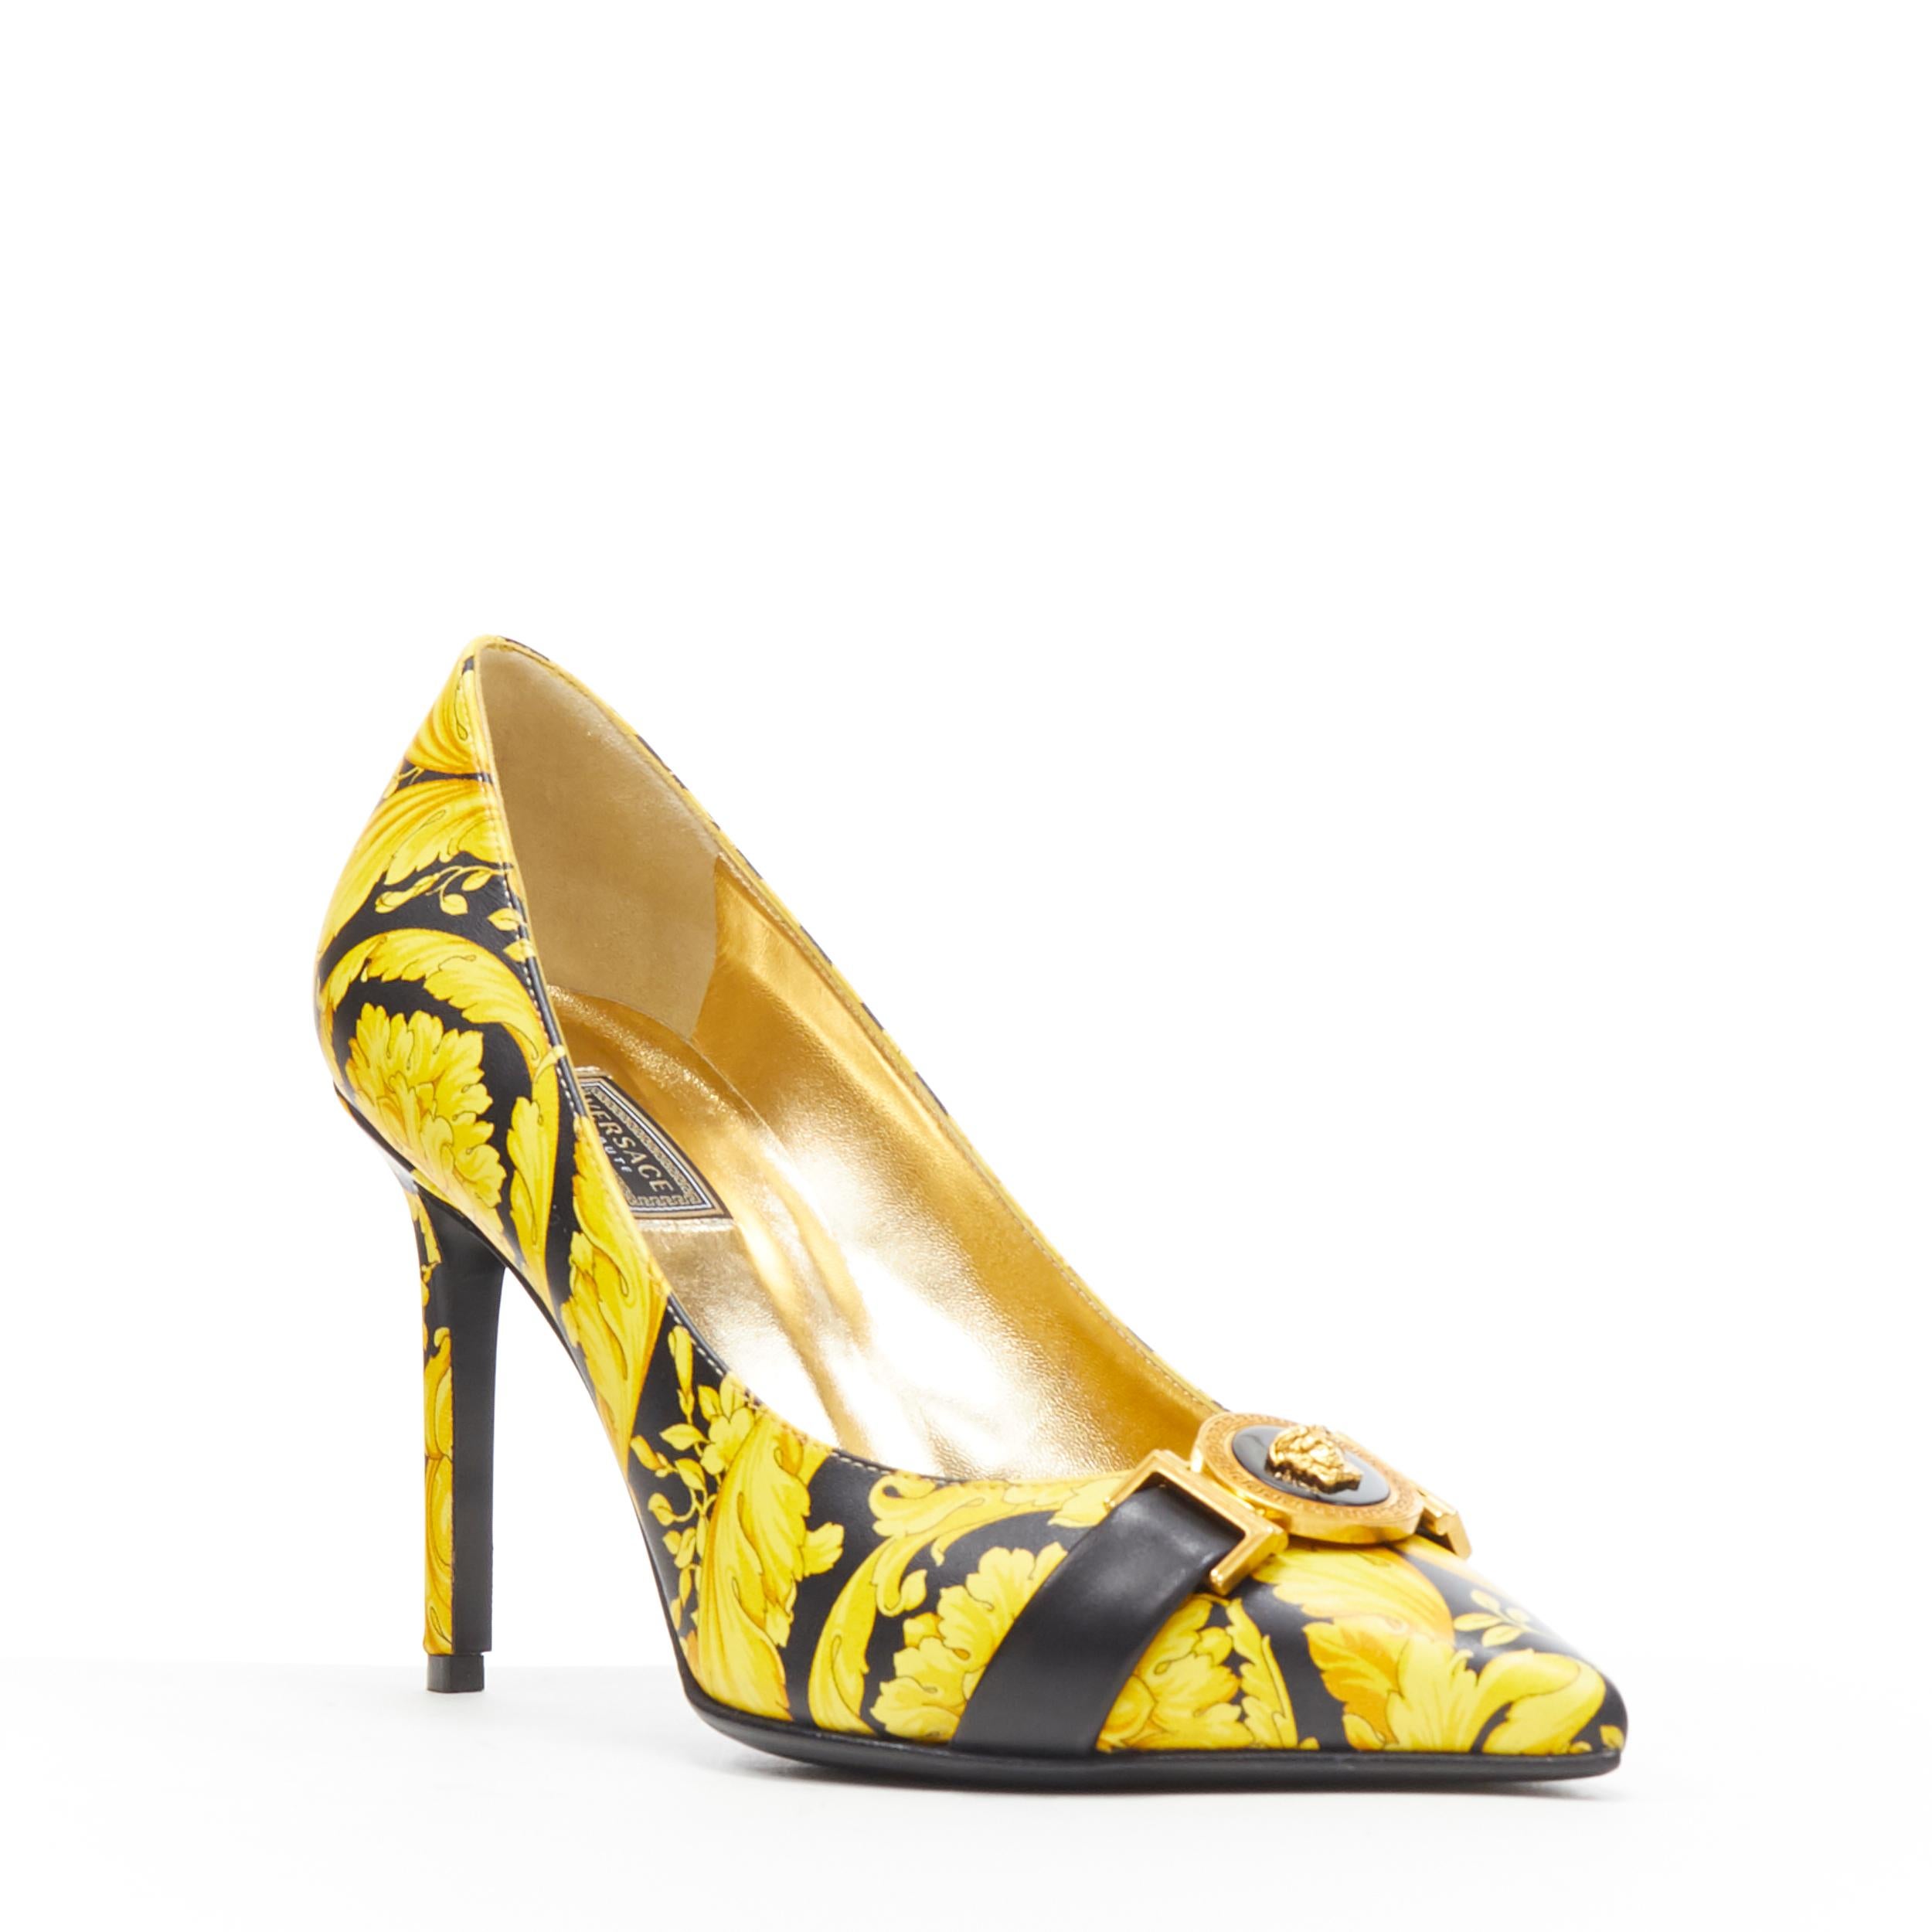 new VERSACE 1992 Tribute Baroque Hibiscus barocco Medusa strap leather pump EU37
Brand: Versace
Designer: Donatella Versace
Collection: Spring Summer 2018
Model Name / Style: Baroque pump
Material: Leather
Color: Gold, black
Pattern: Floral
Extra